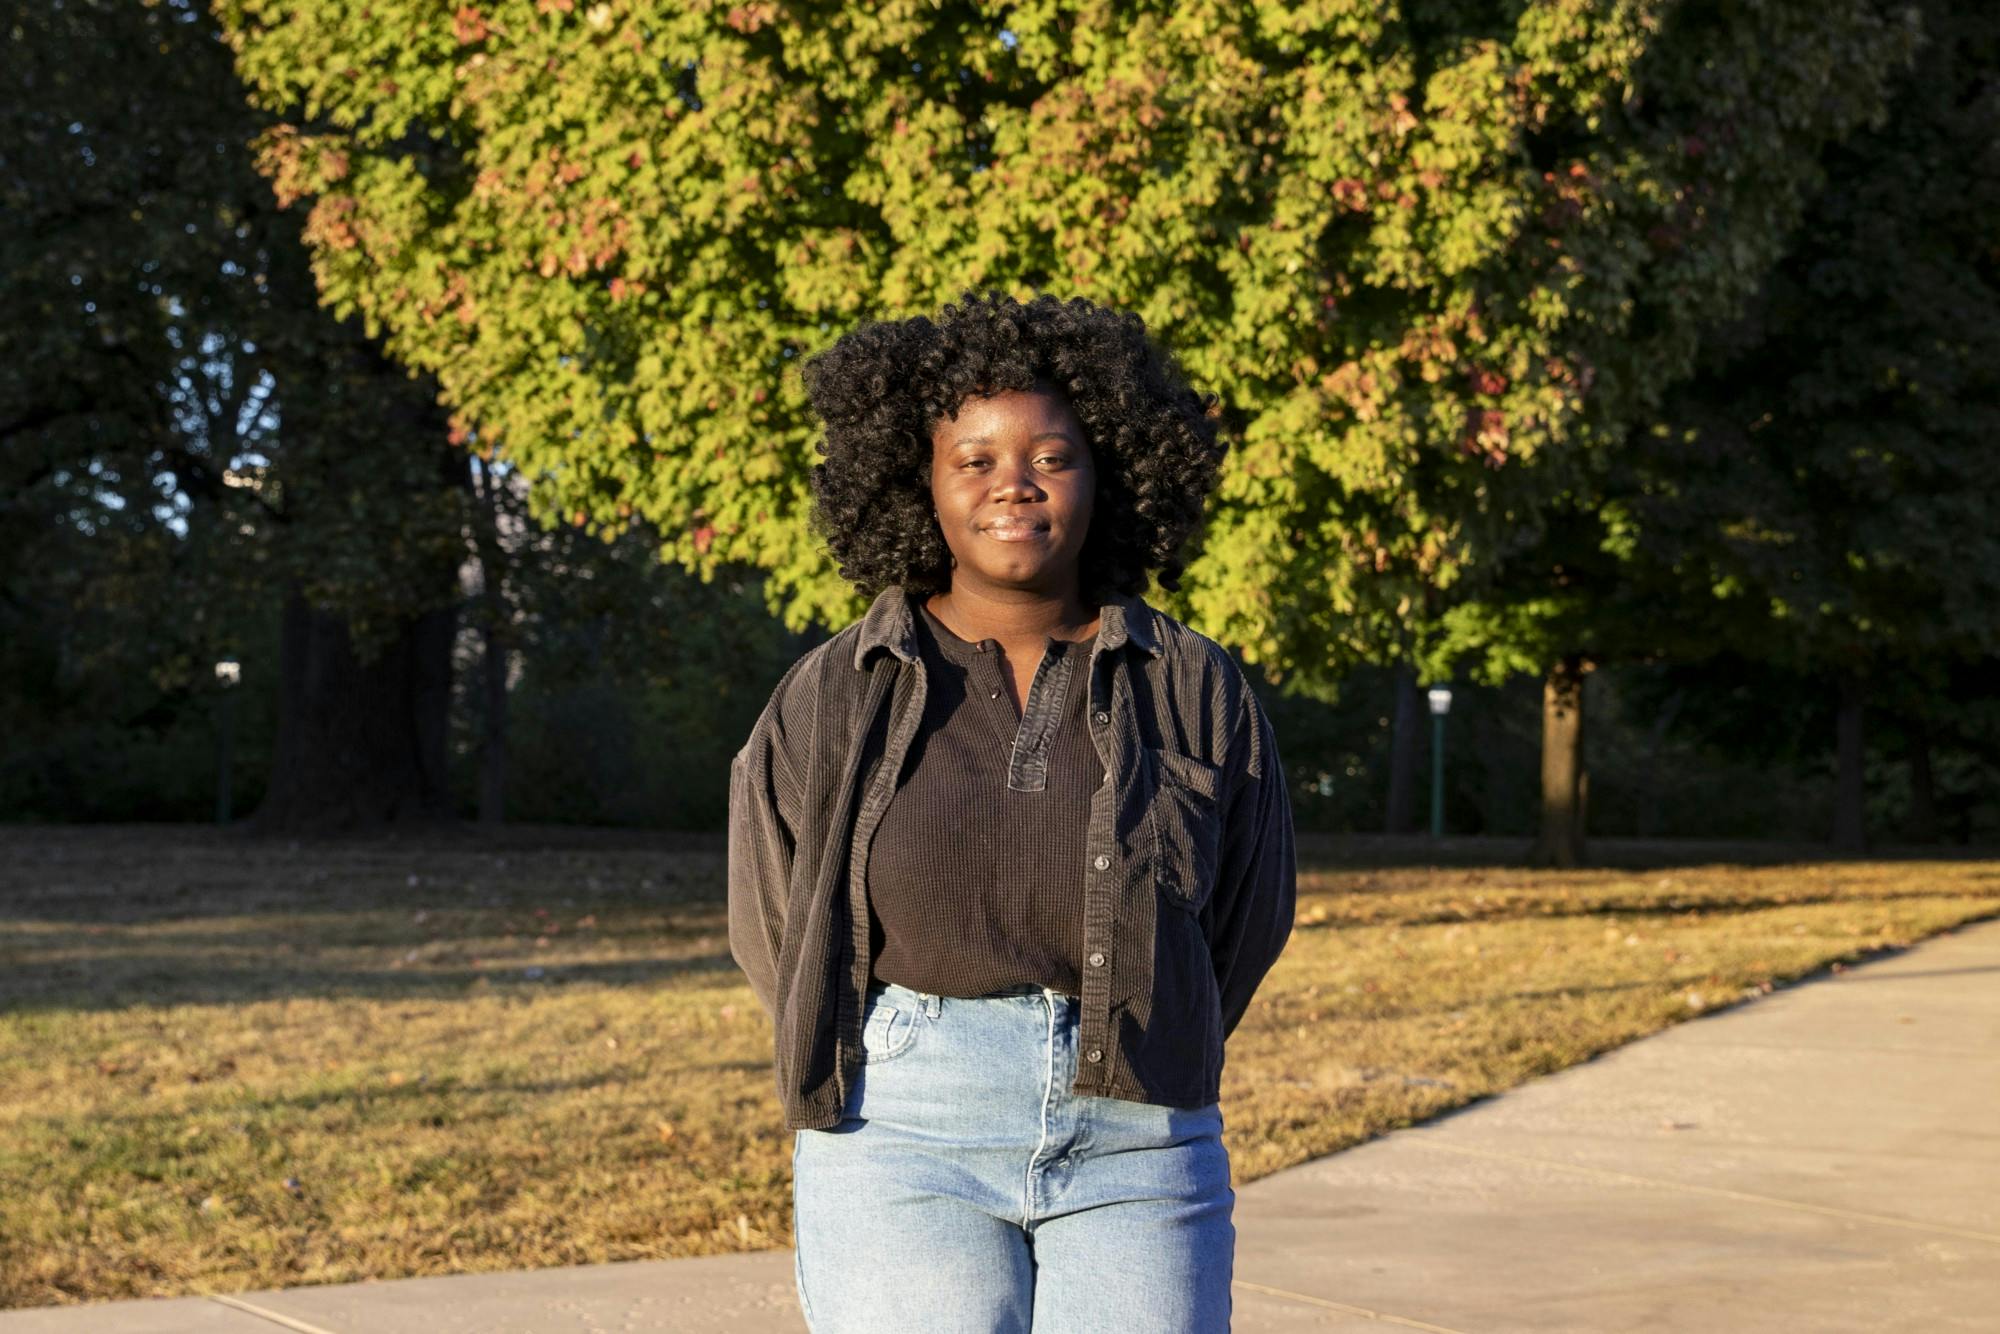 Junior Massa Massa Massaley stands in the sun Oct. 5﻿in Bloomington, Indiana. Massaley is a Black student at IU and has experienced acts of bias alongside her best friend Alice Aluko.